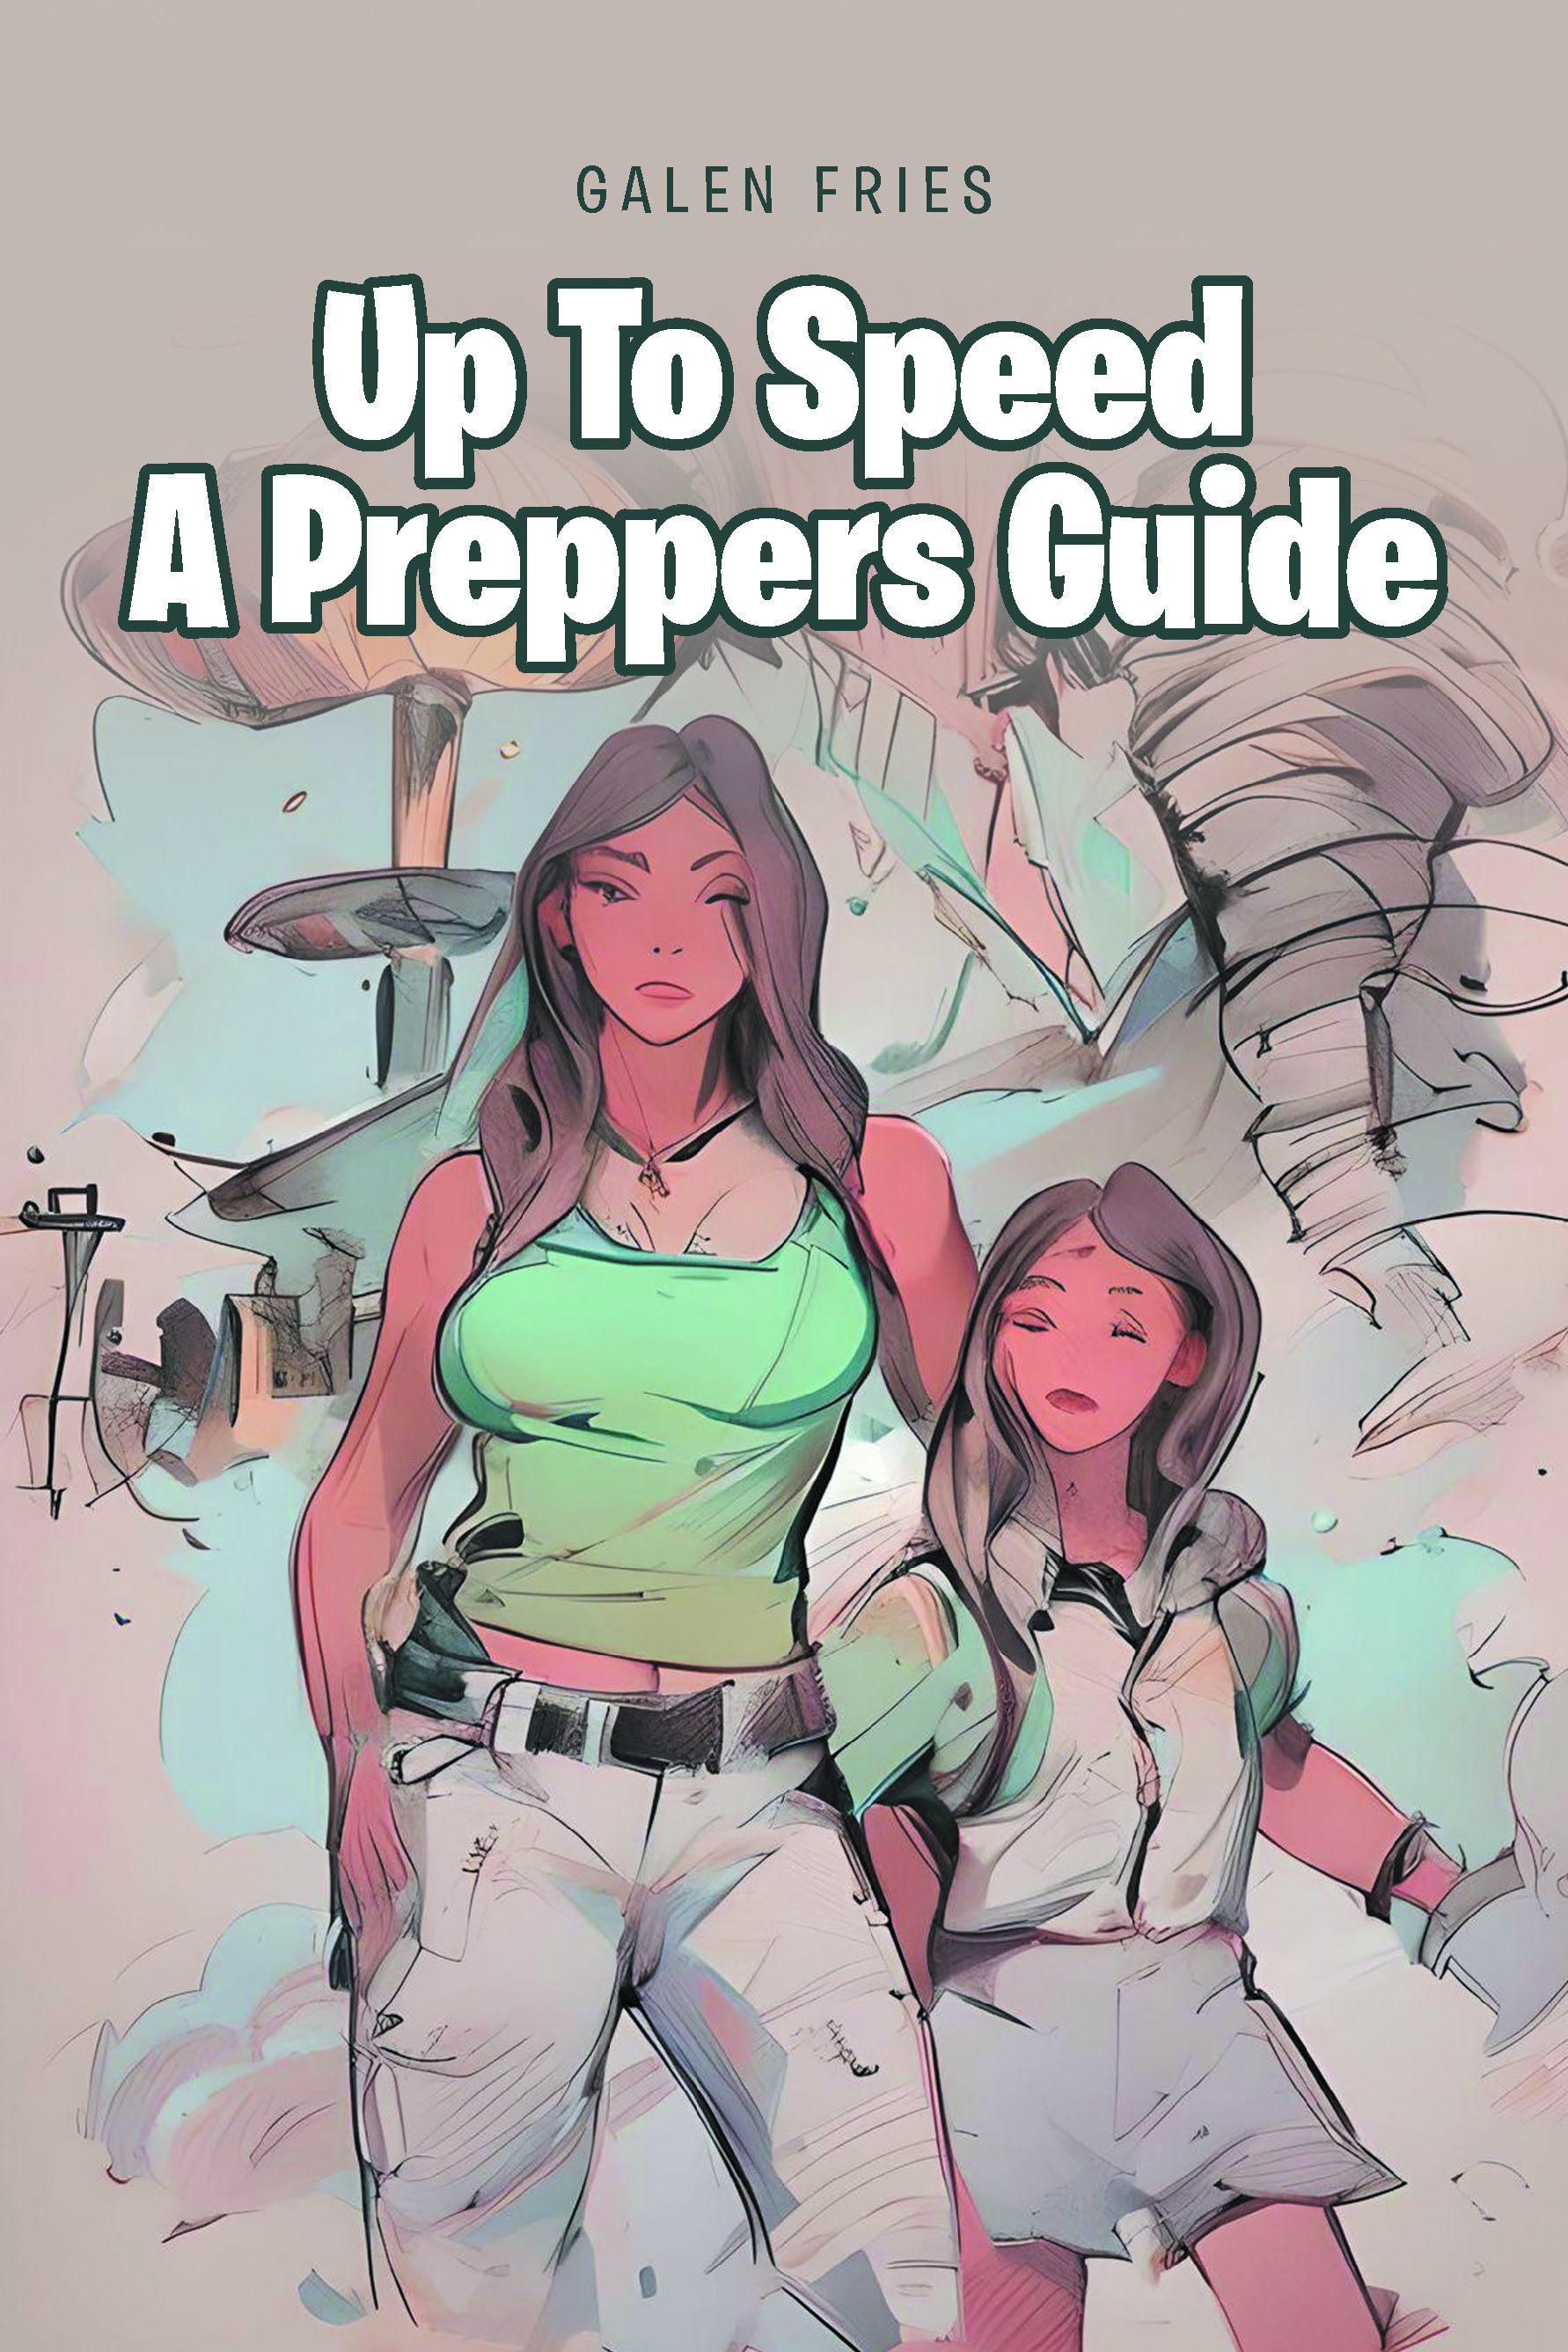 Galen Fries’s New Book, "Up To Speed: A Preppers Guide," is a Thought-Provoking Exploration of How One Can Become Better Prepared for Any Kind of Disaster